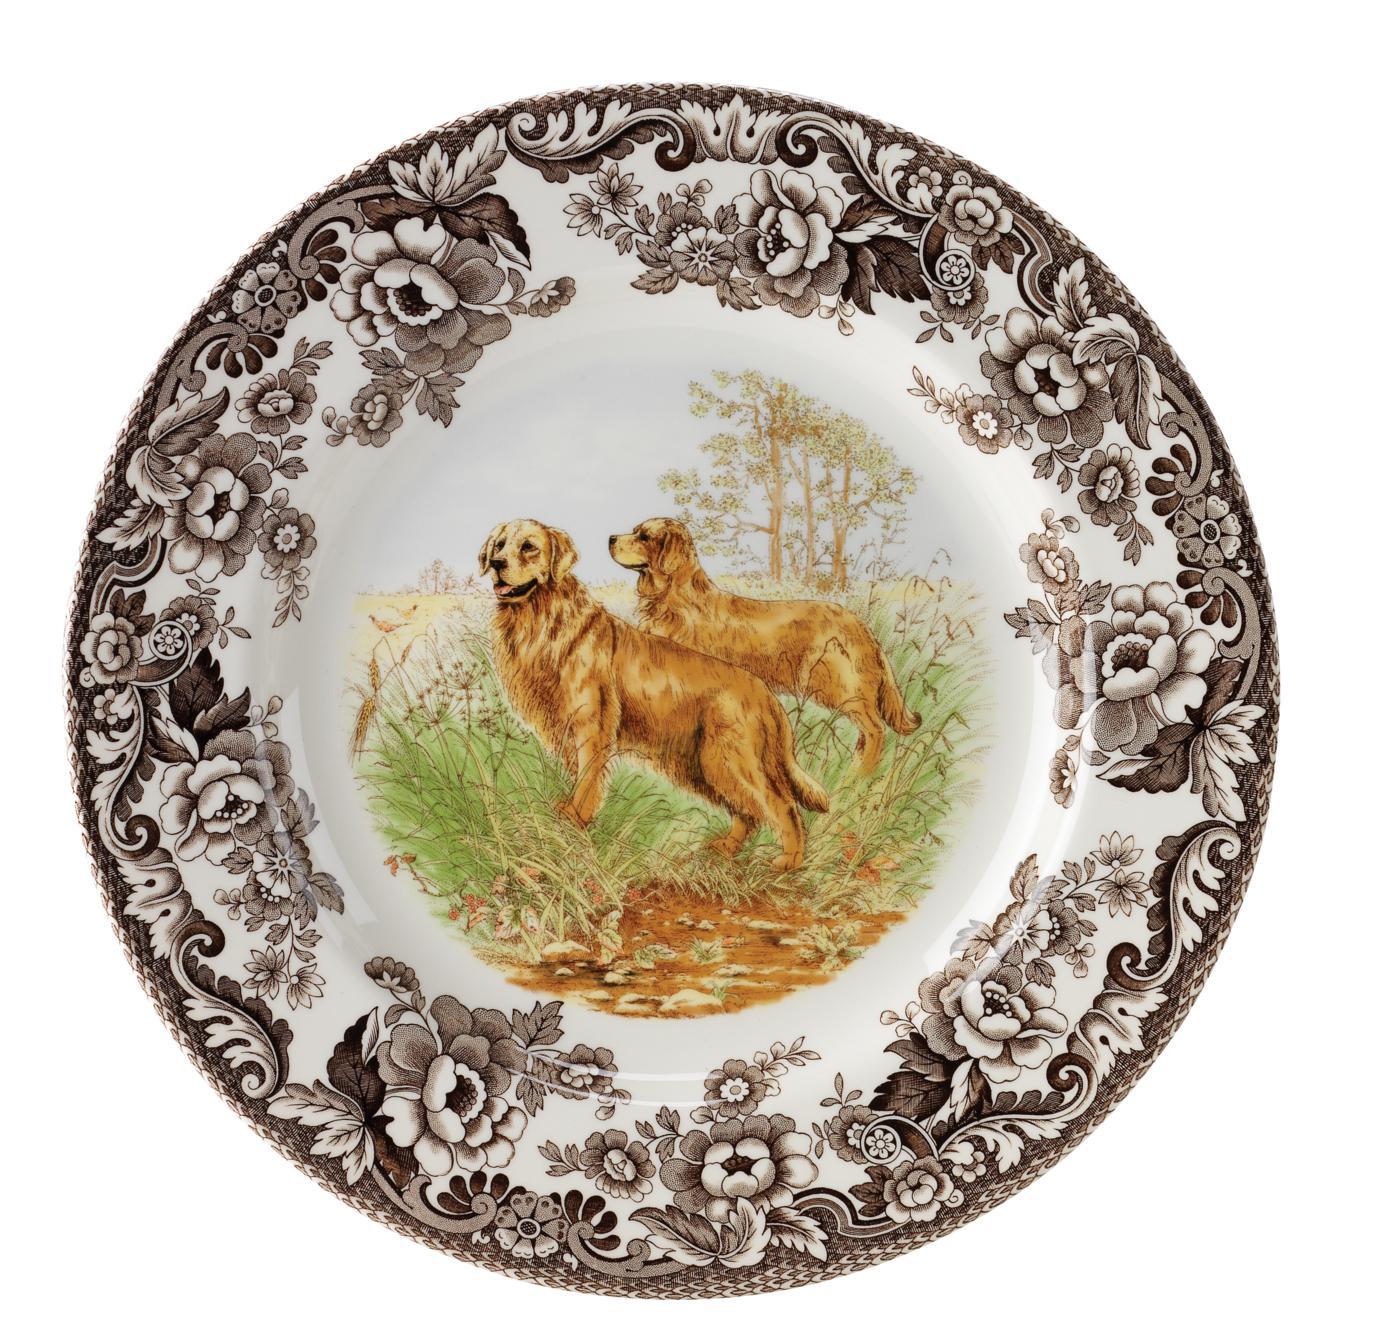 Woodland Dinner Plate 10.5 Inch (Golden Retriever) image number null